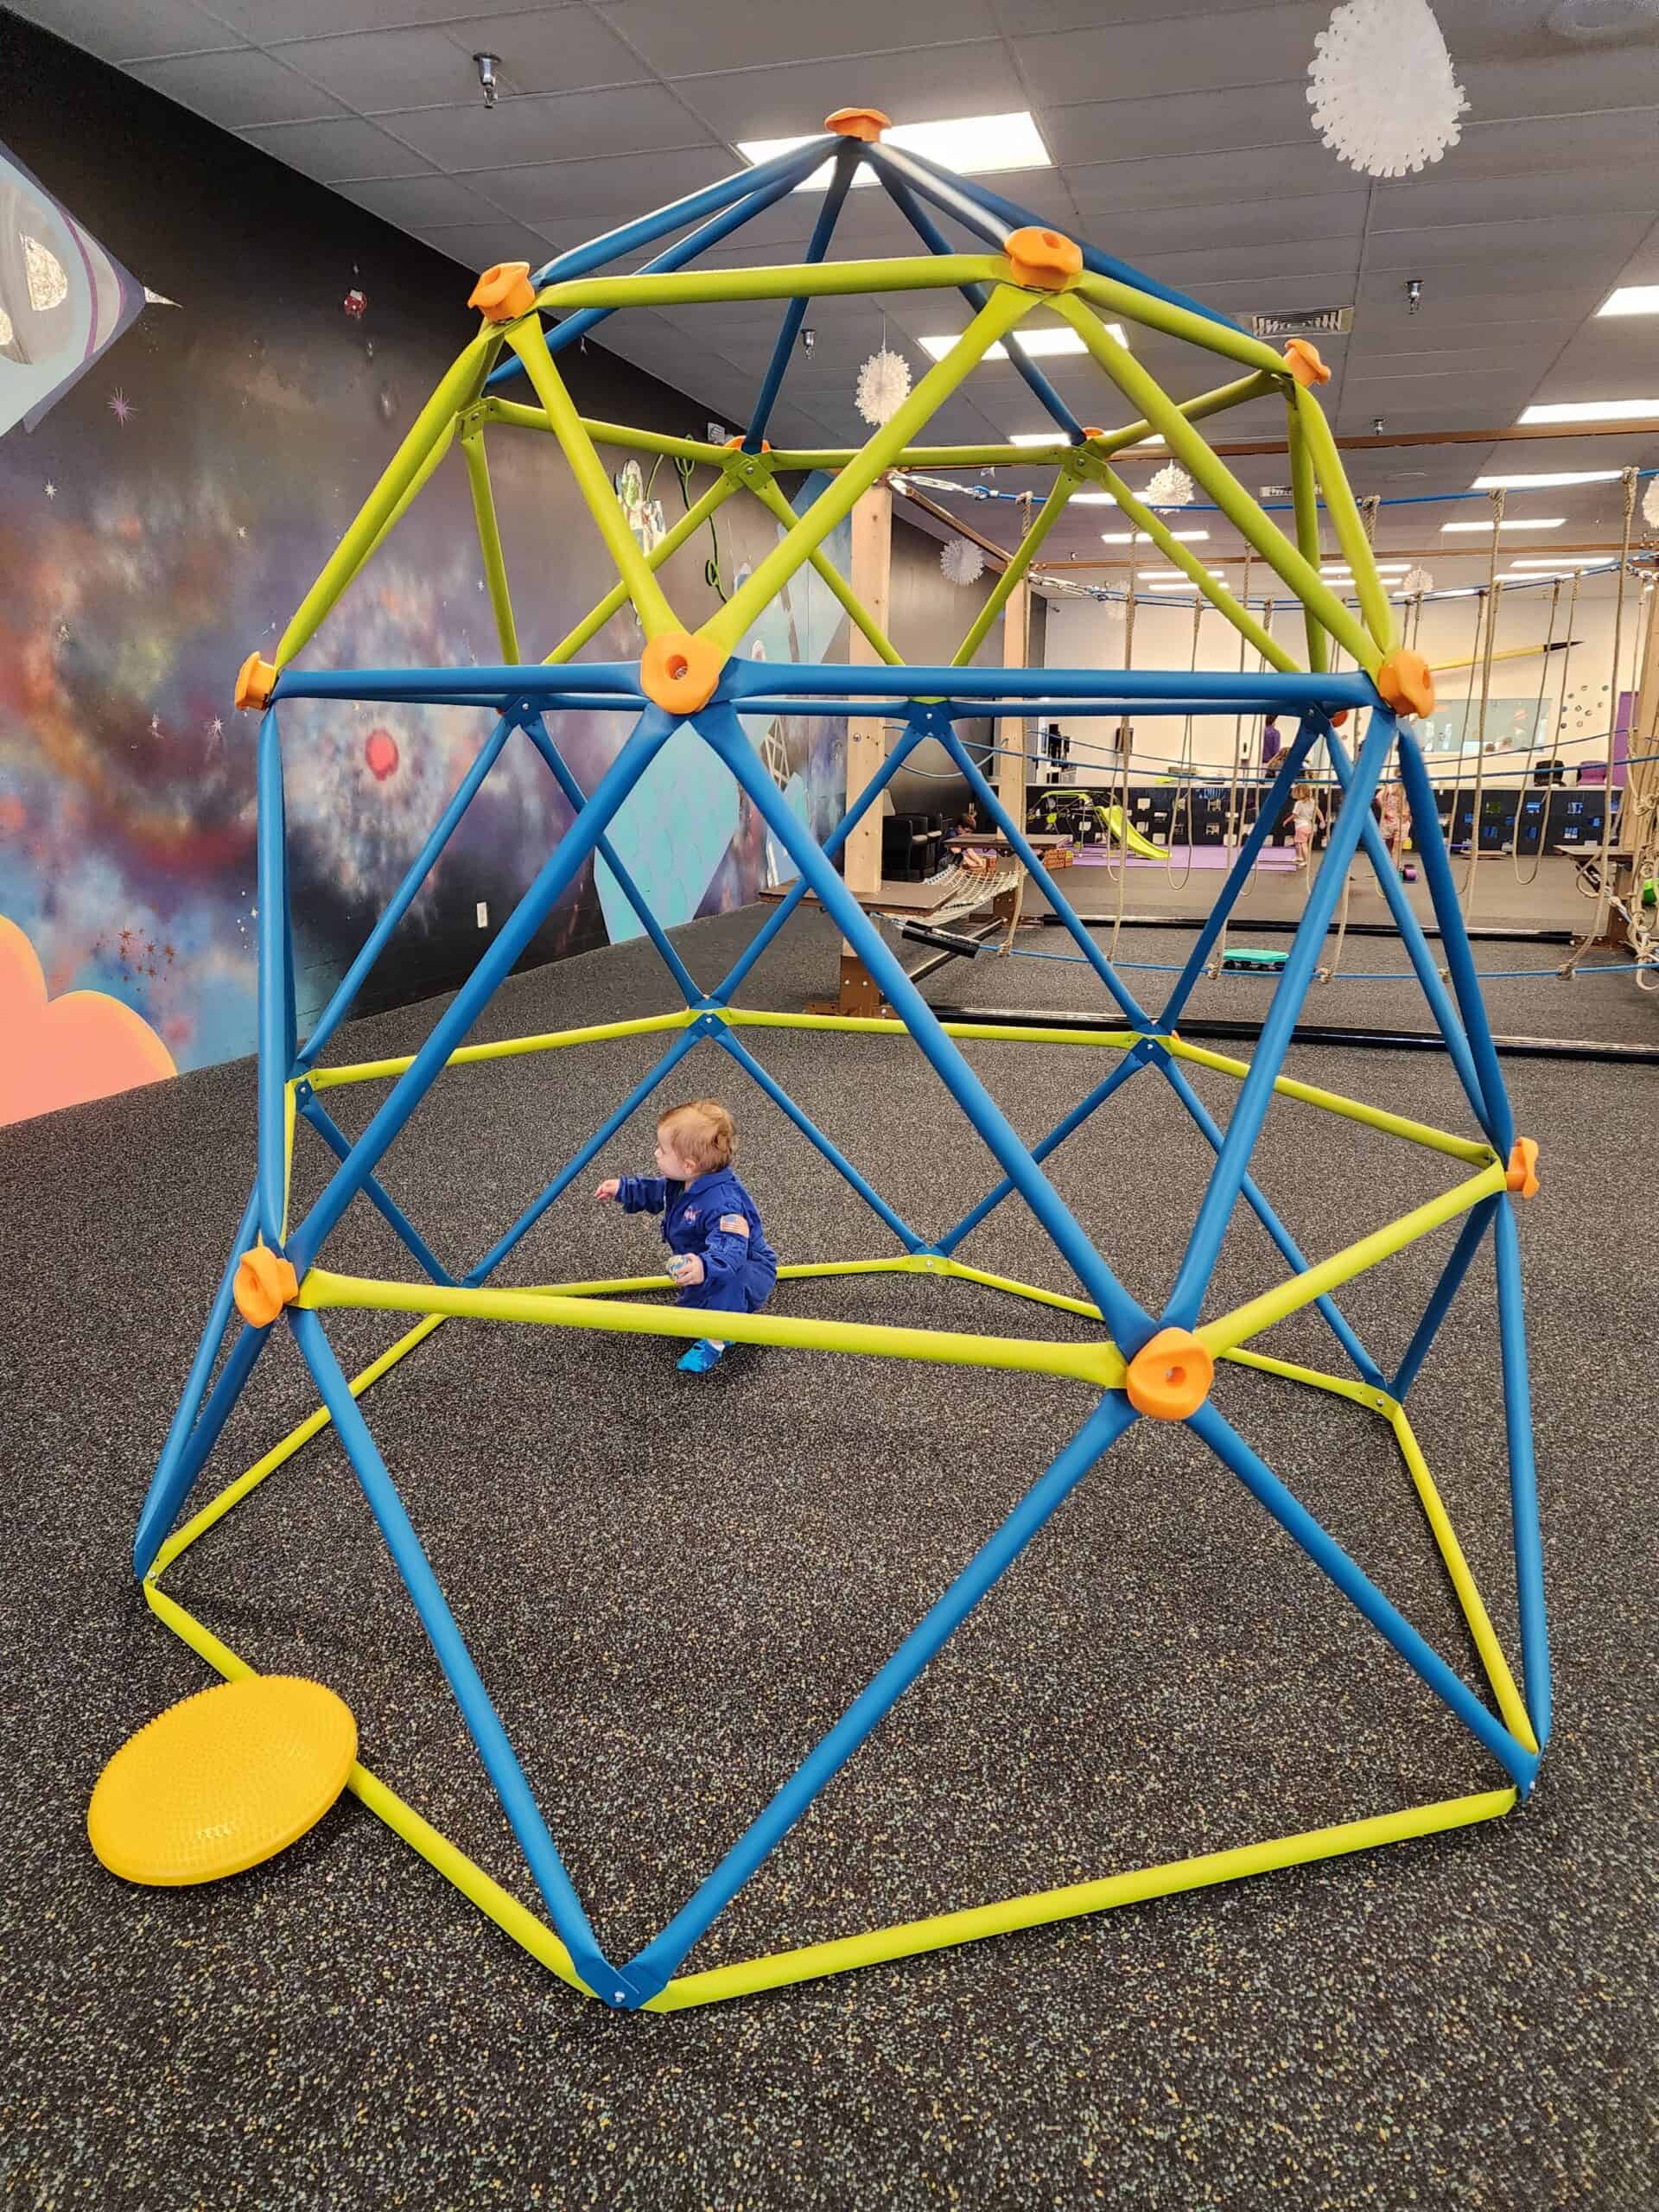 A small child in a blue outfit explores a vibrant, geometric climbing dome at Over The Moon Play Space in Cary, NC, with a colorful space-themed mural in the background.